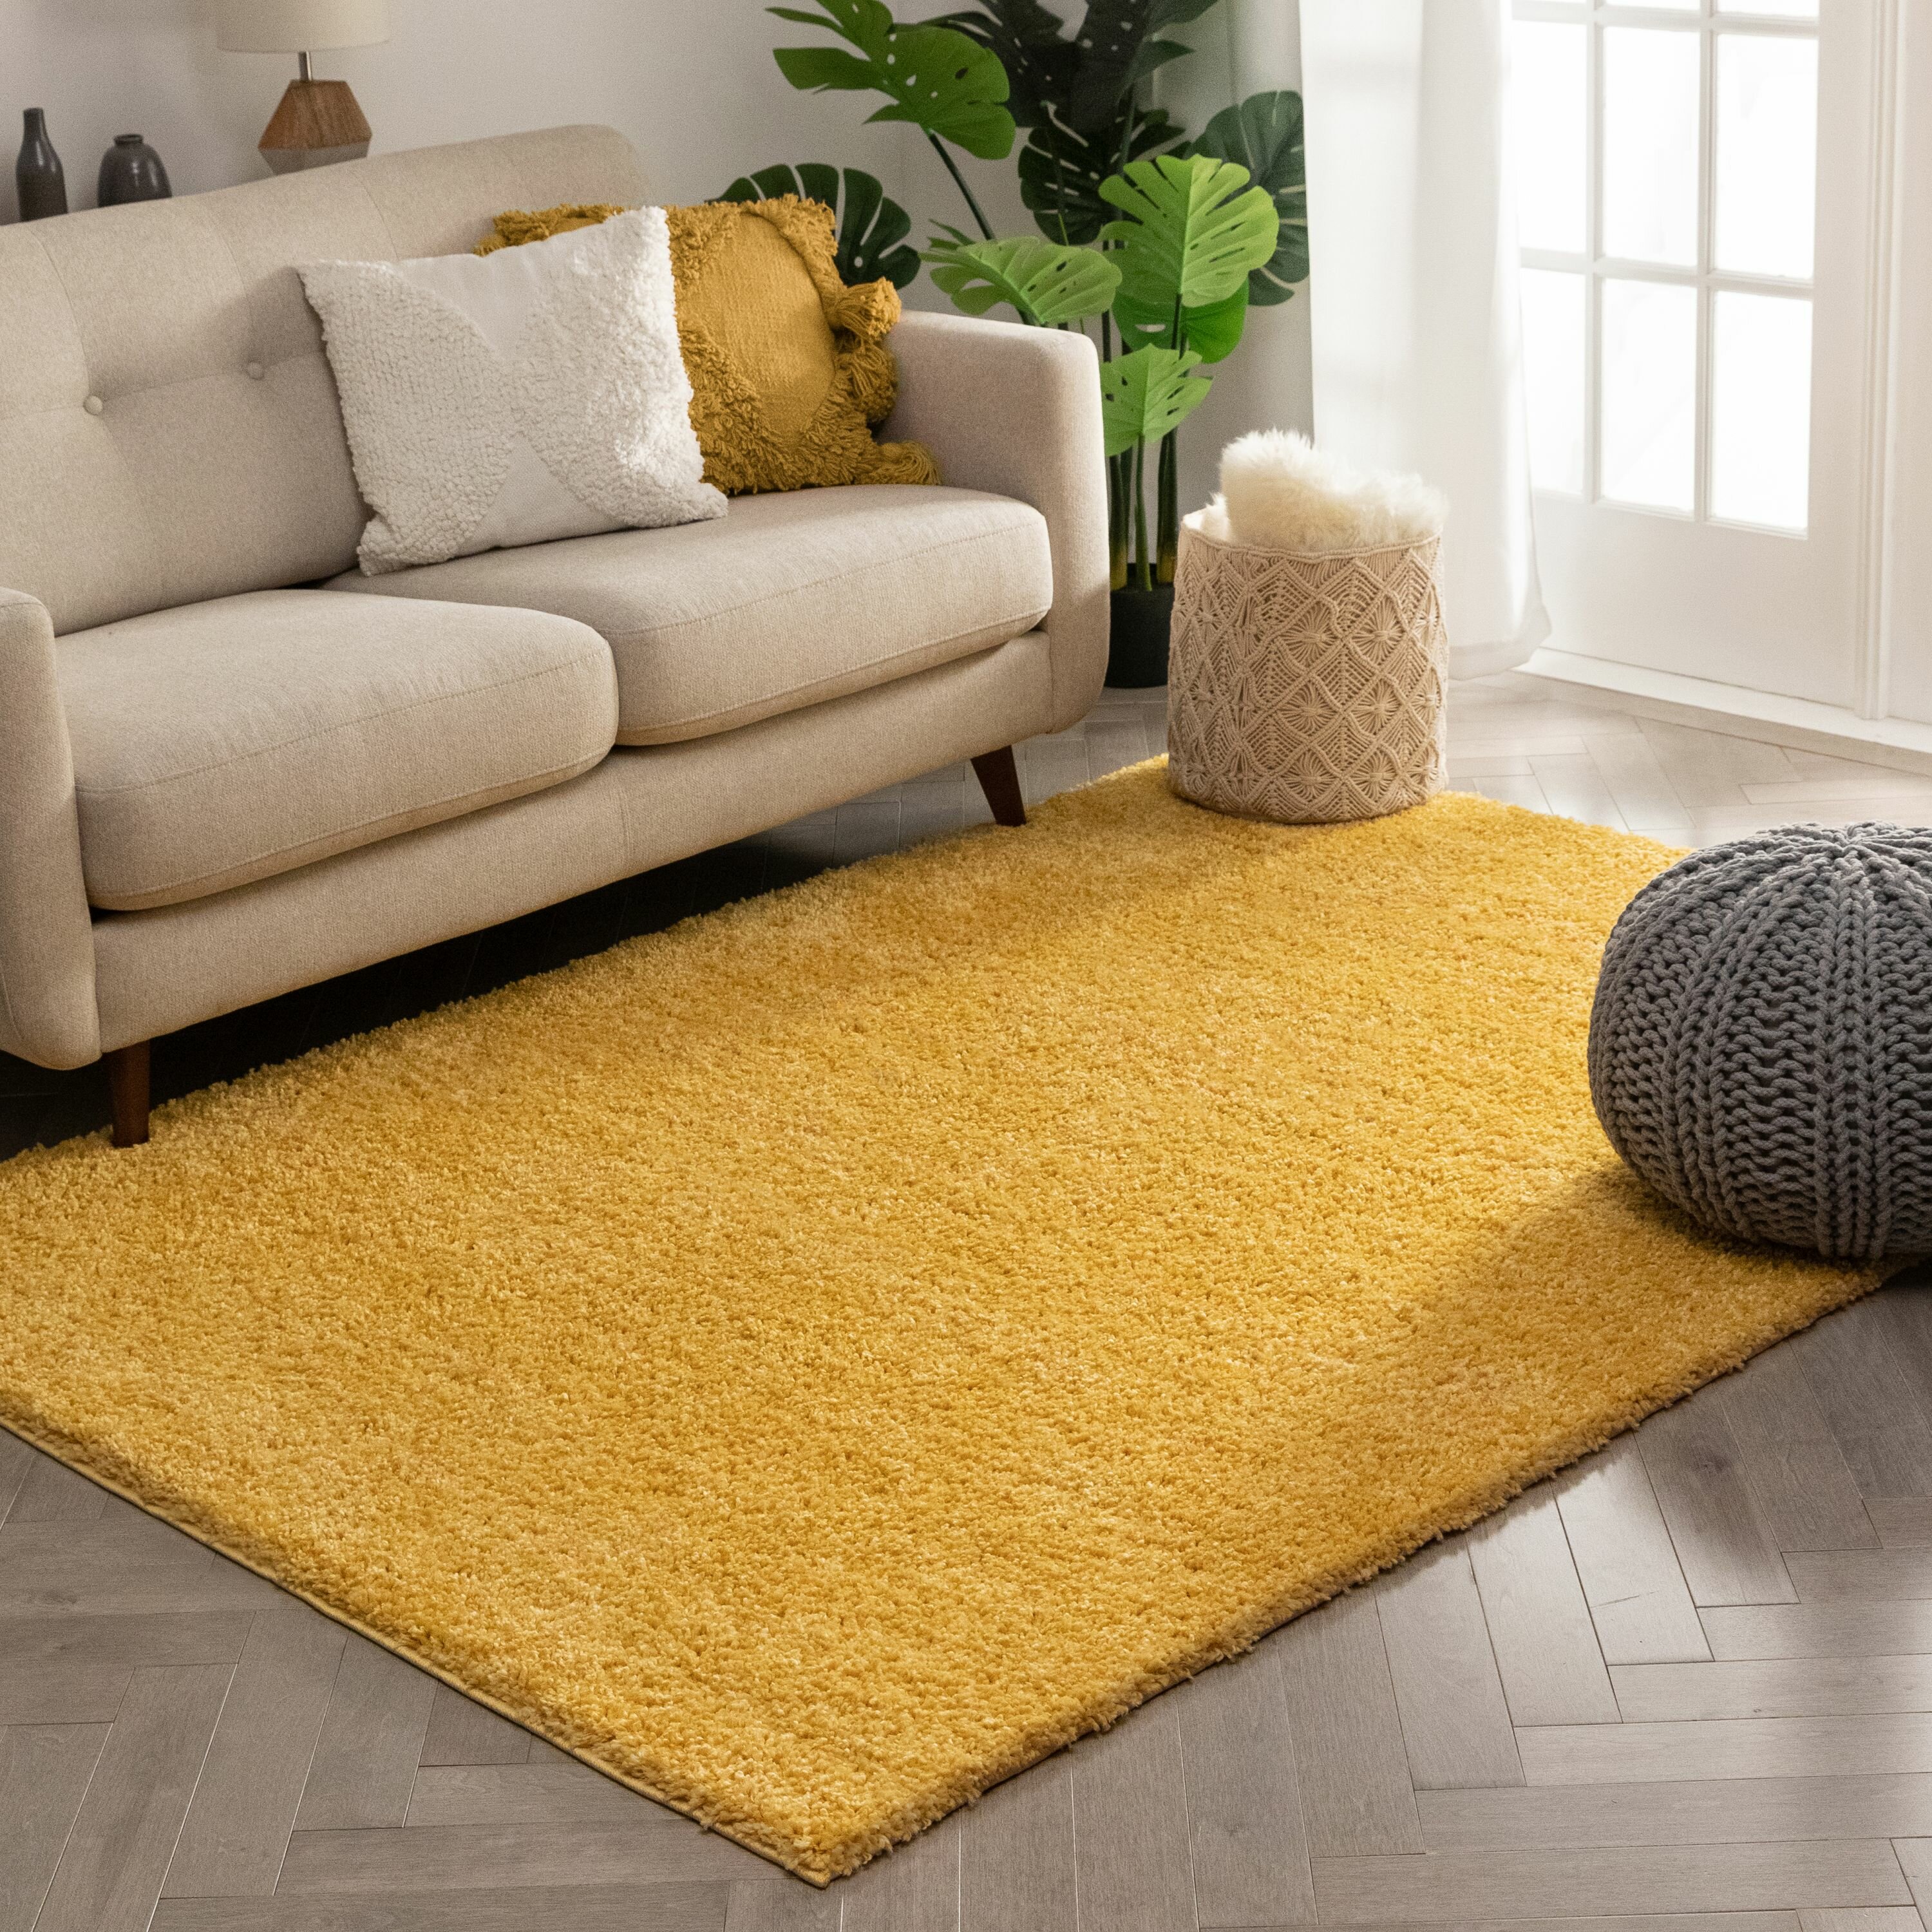 Thick Soft Ochre Mustard Yellow Gold Warm Boutique Shaggy Area Rug Living Room 